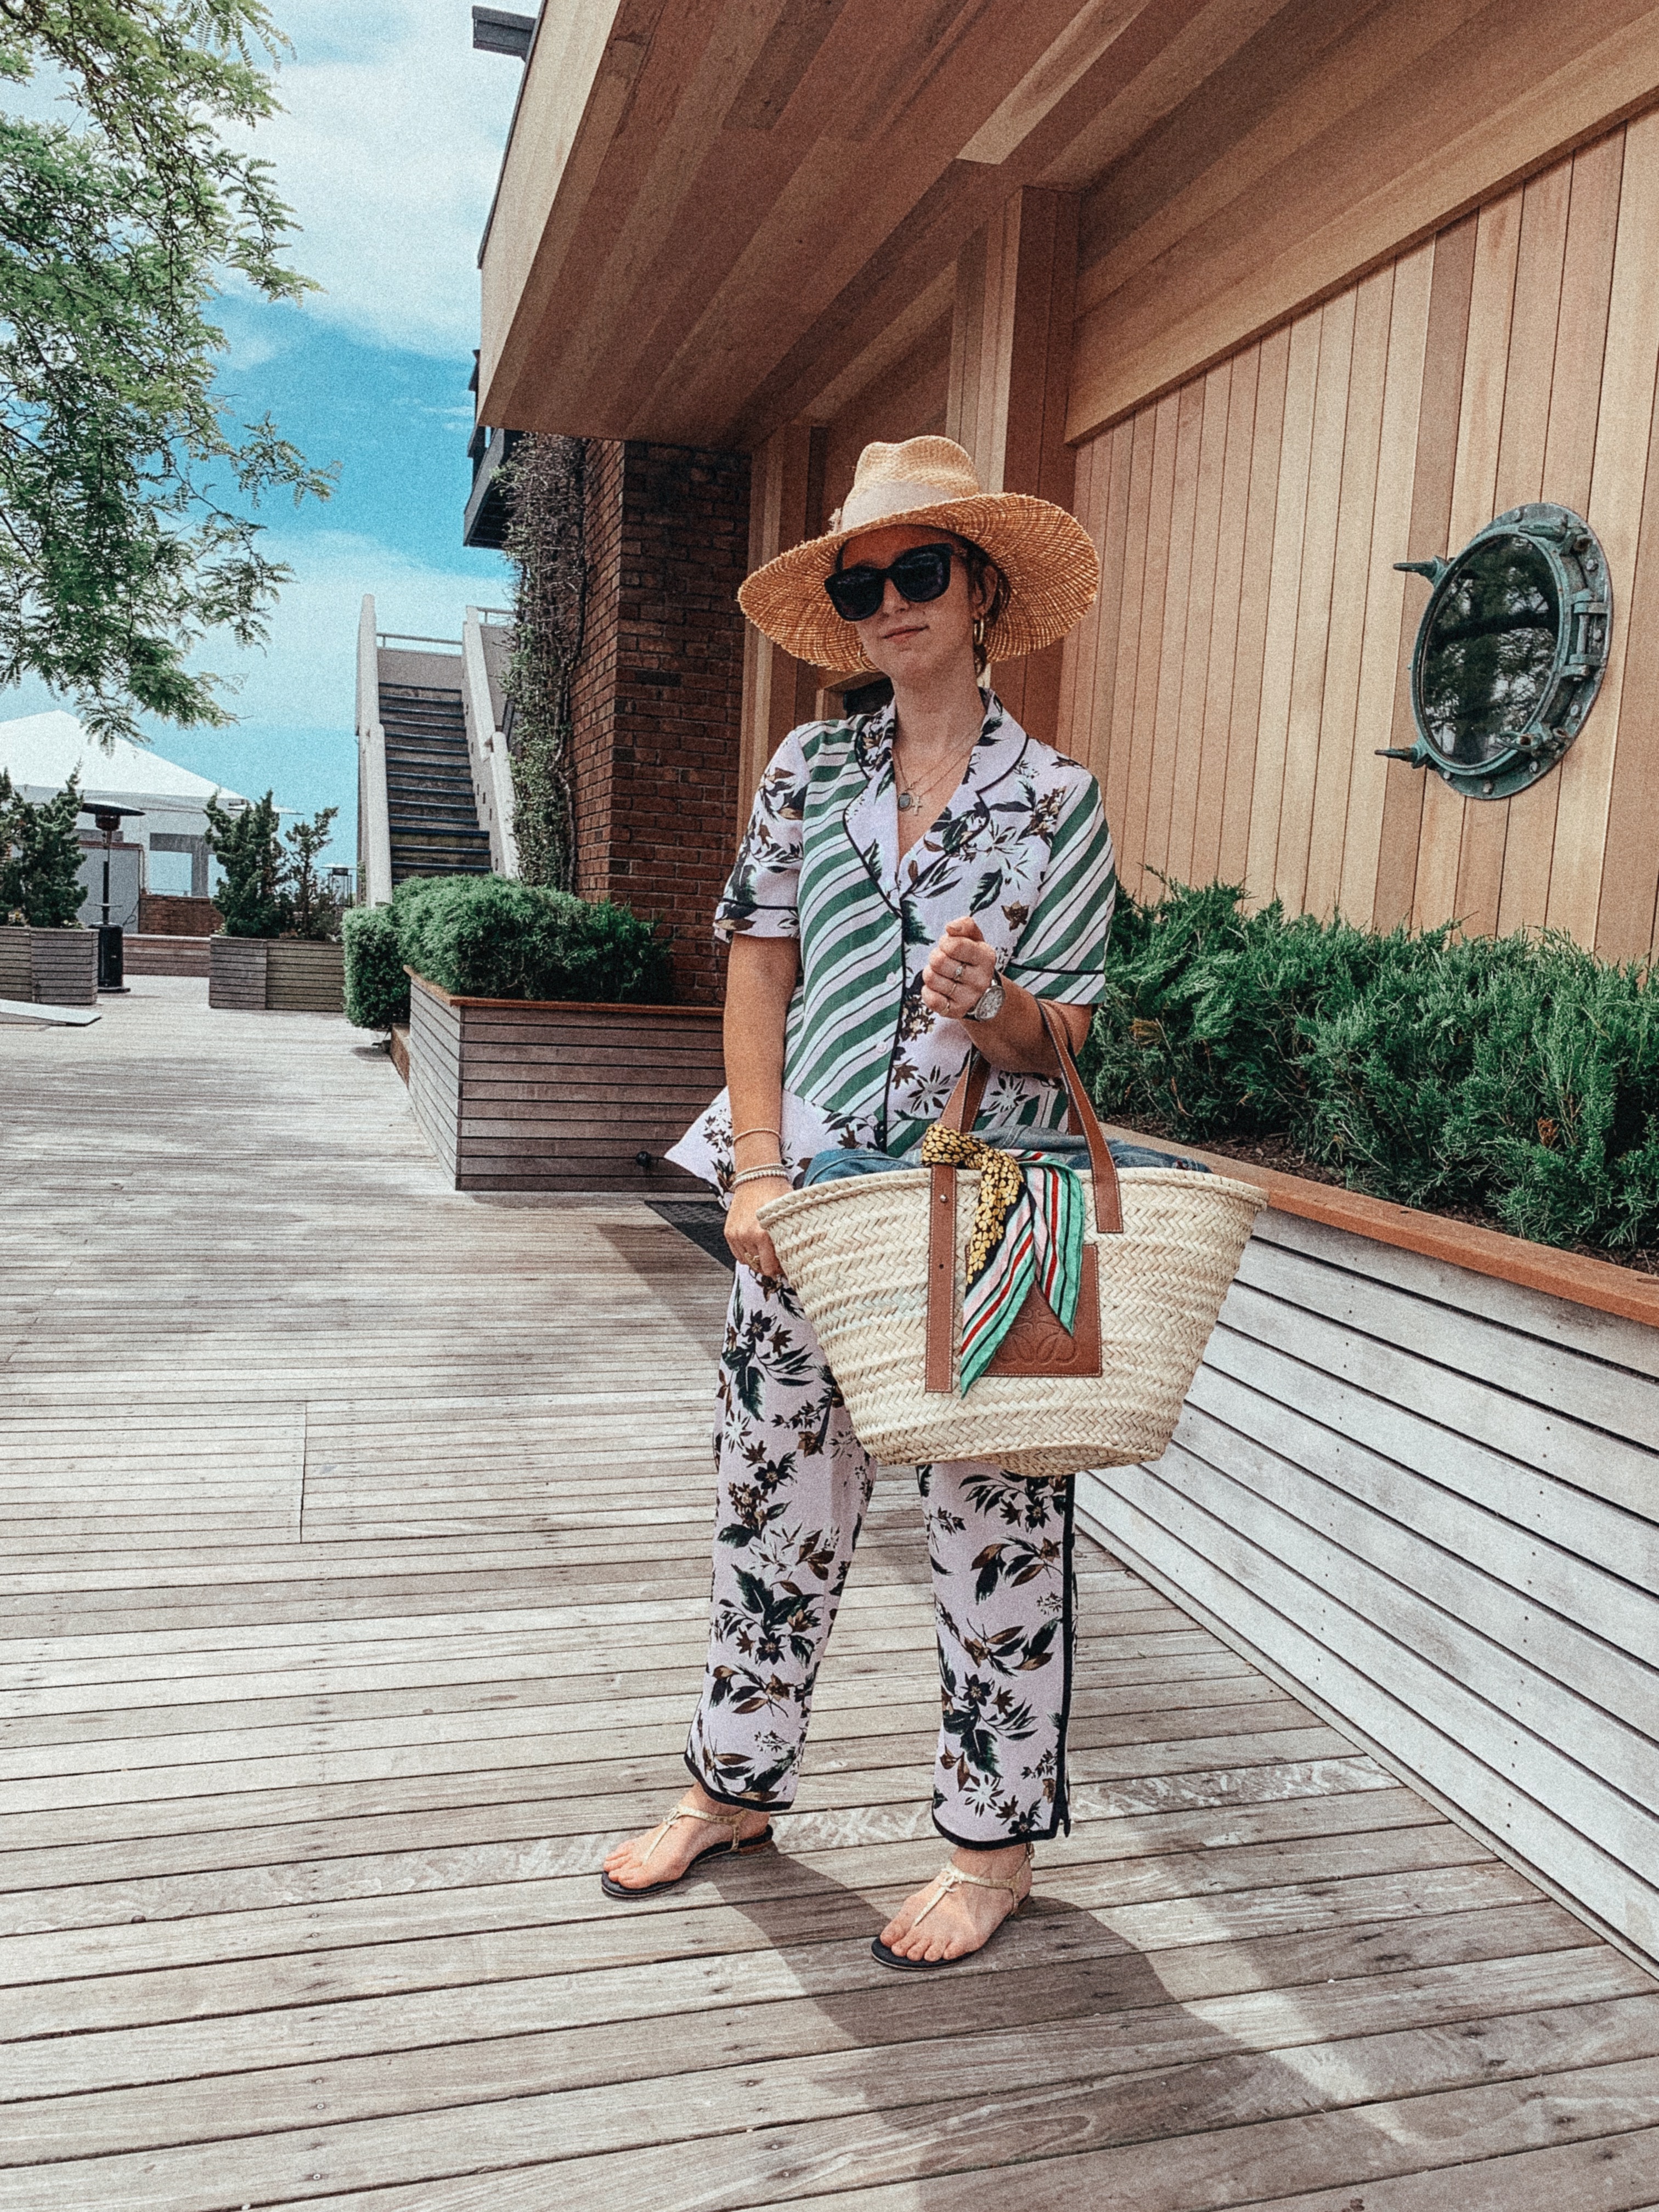 Gone to Gurney's Montauk Resort & Seawater Spa - Should you go?- Blogger-Hotel-Review-Gurneys-Hotel #travel #gurneys #montauk #summer #beach #casualstyle #outfit #summeroutfit #dvf